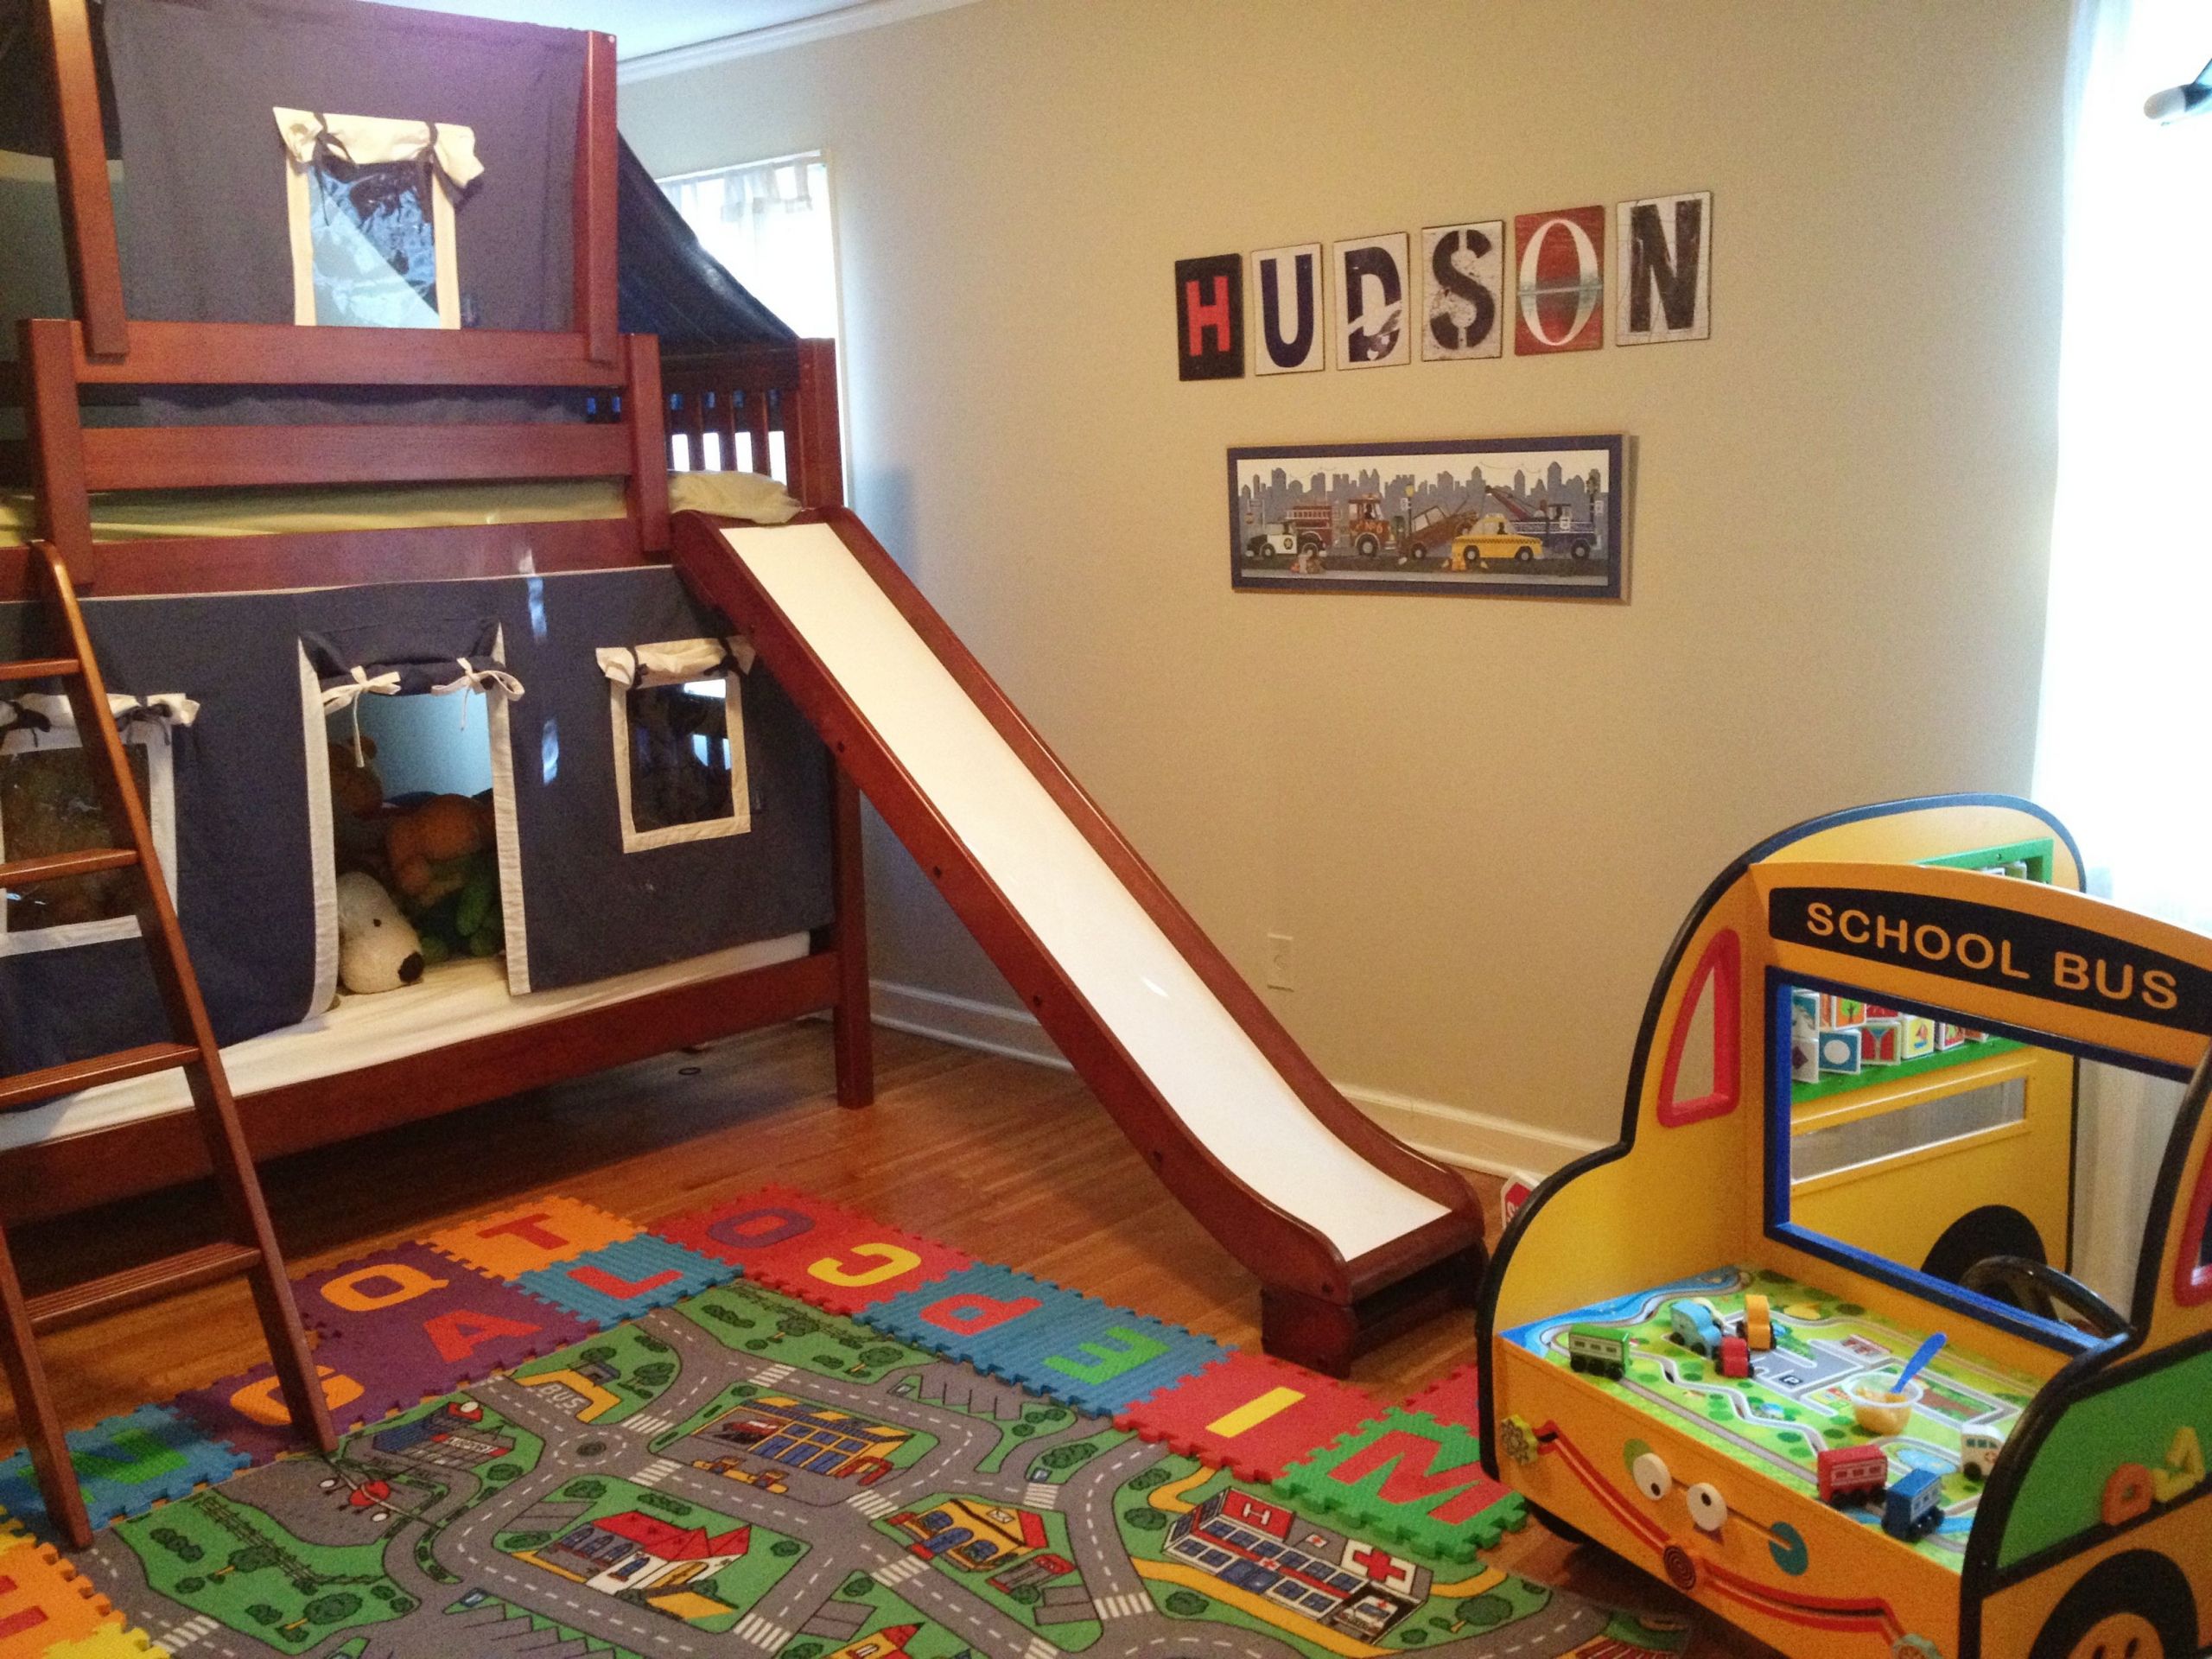 Boy Toddlers Bedroom Ideas
 The 25 best Toddler boy bedrooms ideas on Pinterest